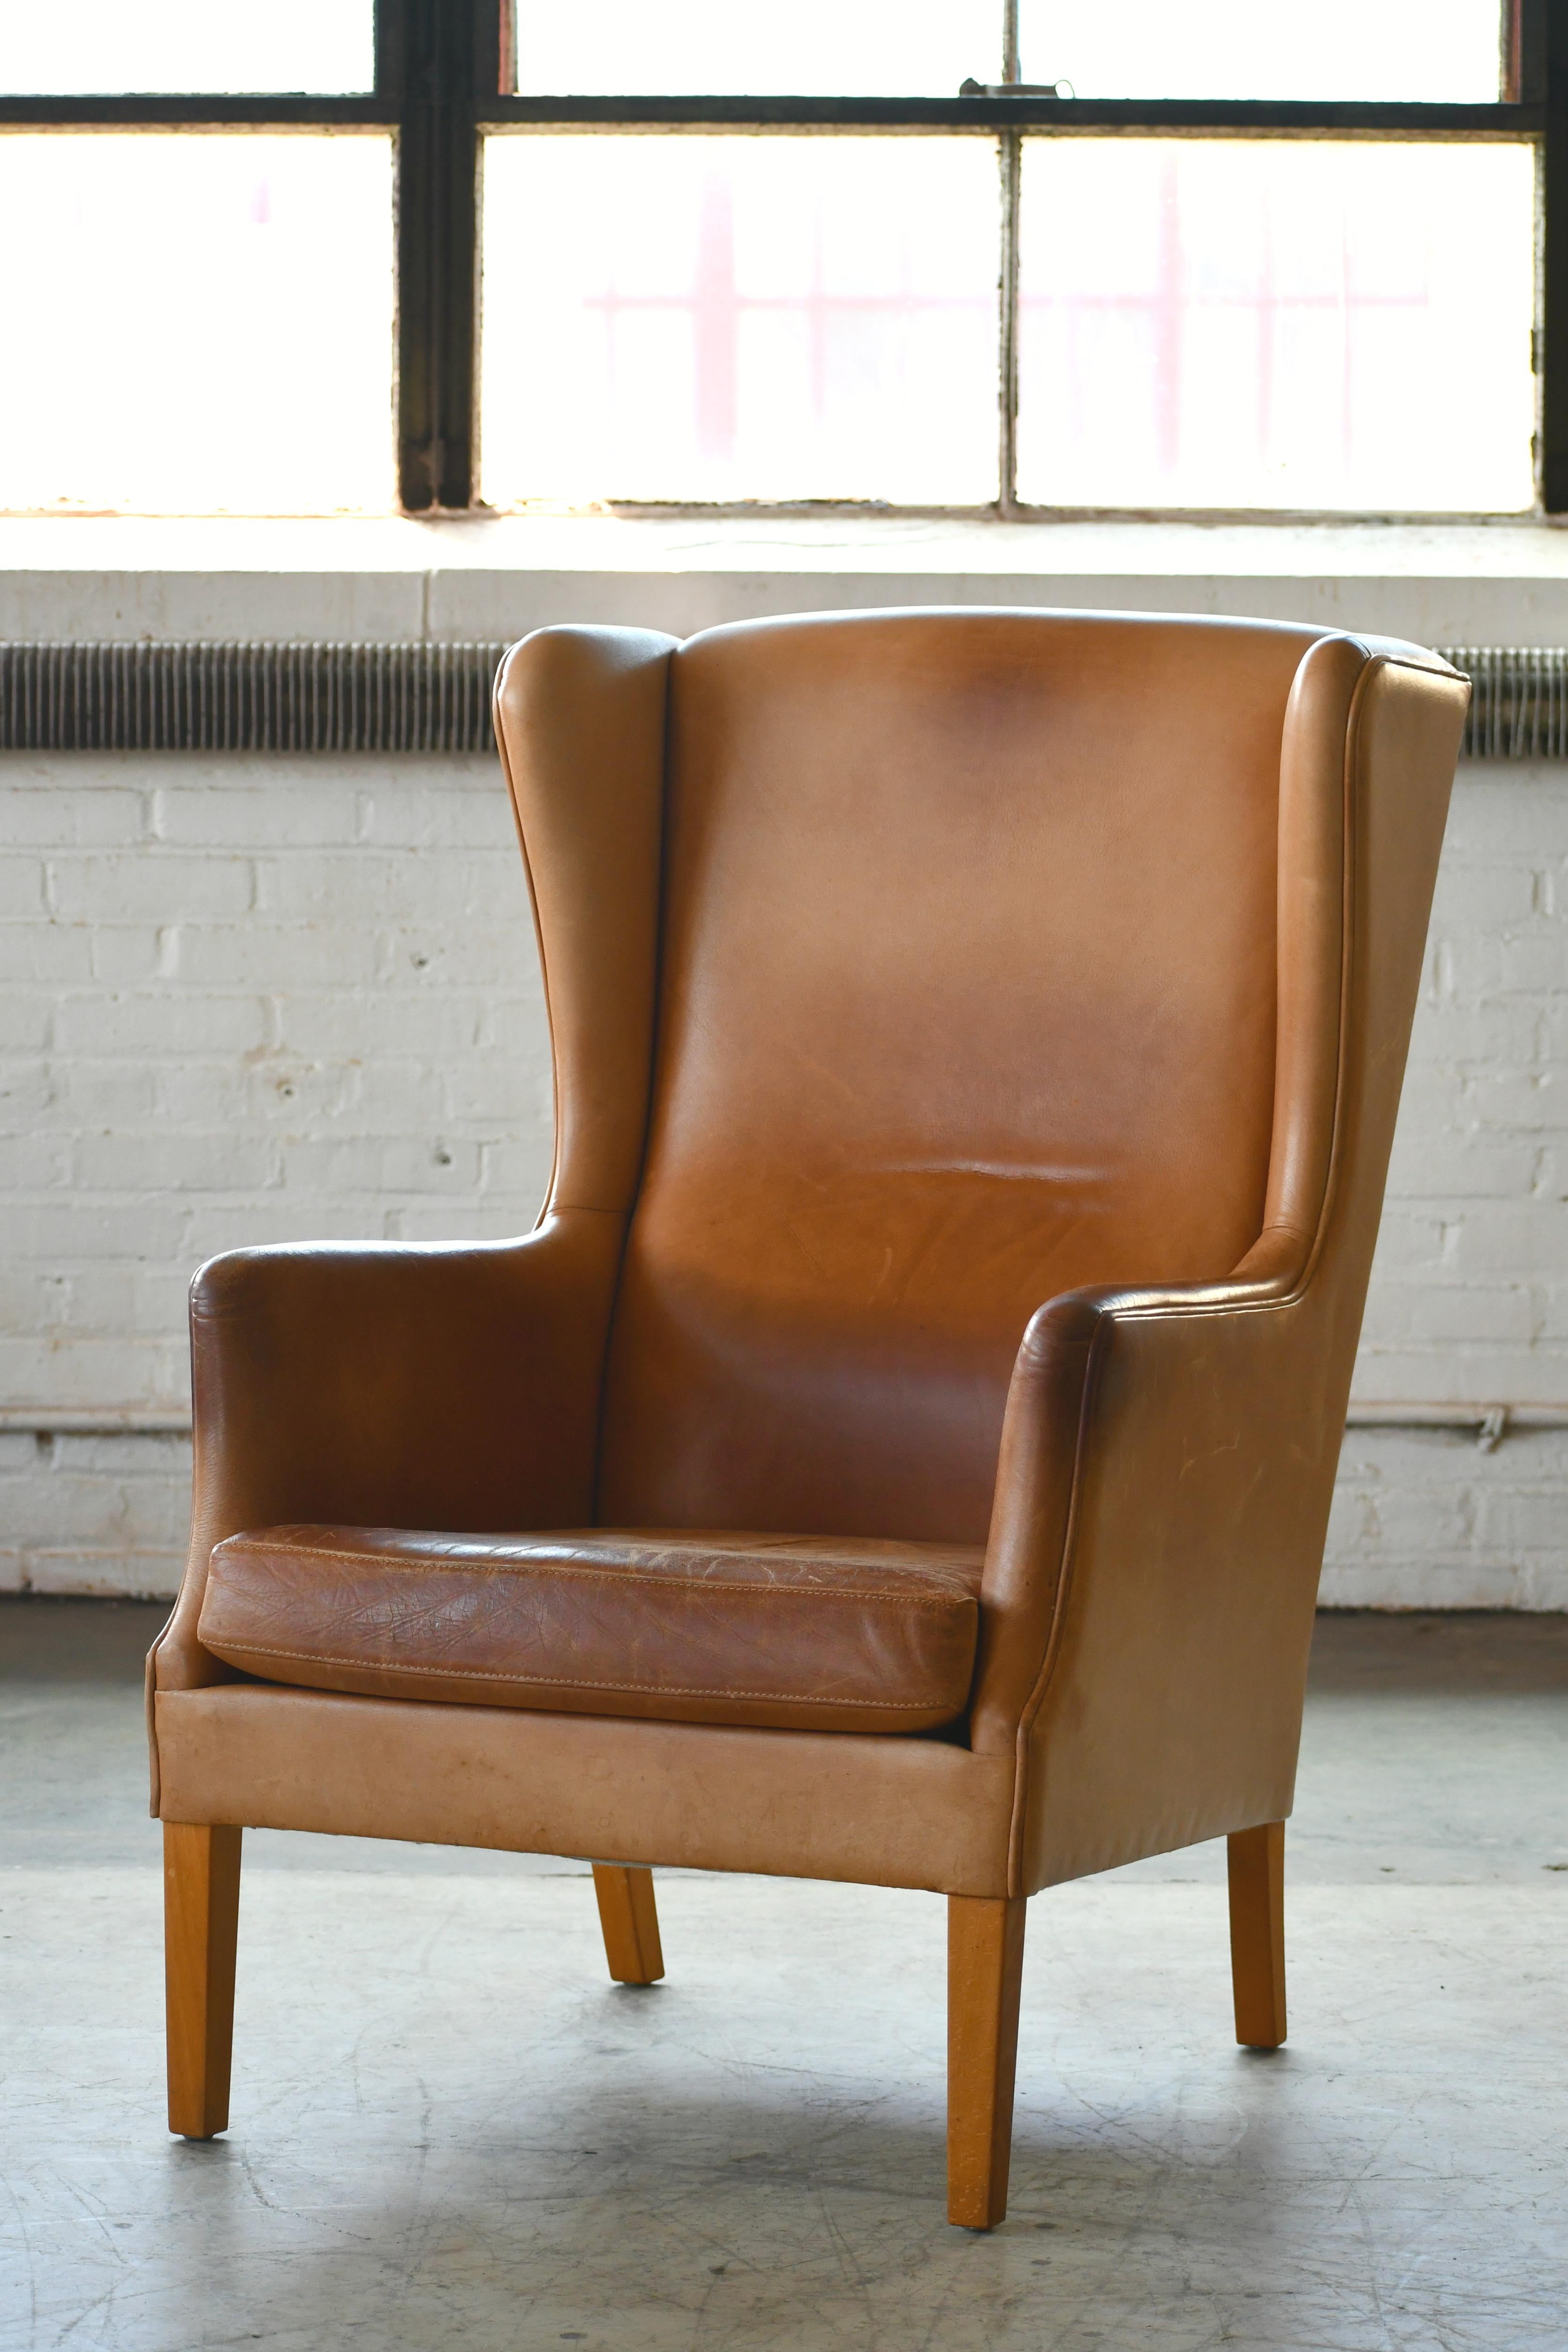 Stylish Danish circa late 1960s wingback chair in the style of Kaare Klint's famous wing back chair from 1941. The chair in unmarked and we are not sure of the maker. Nice clean lines and Classic elegance yet sturdy and comfortable raised on legs of